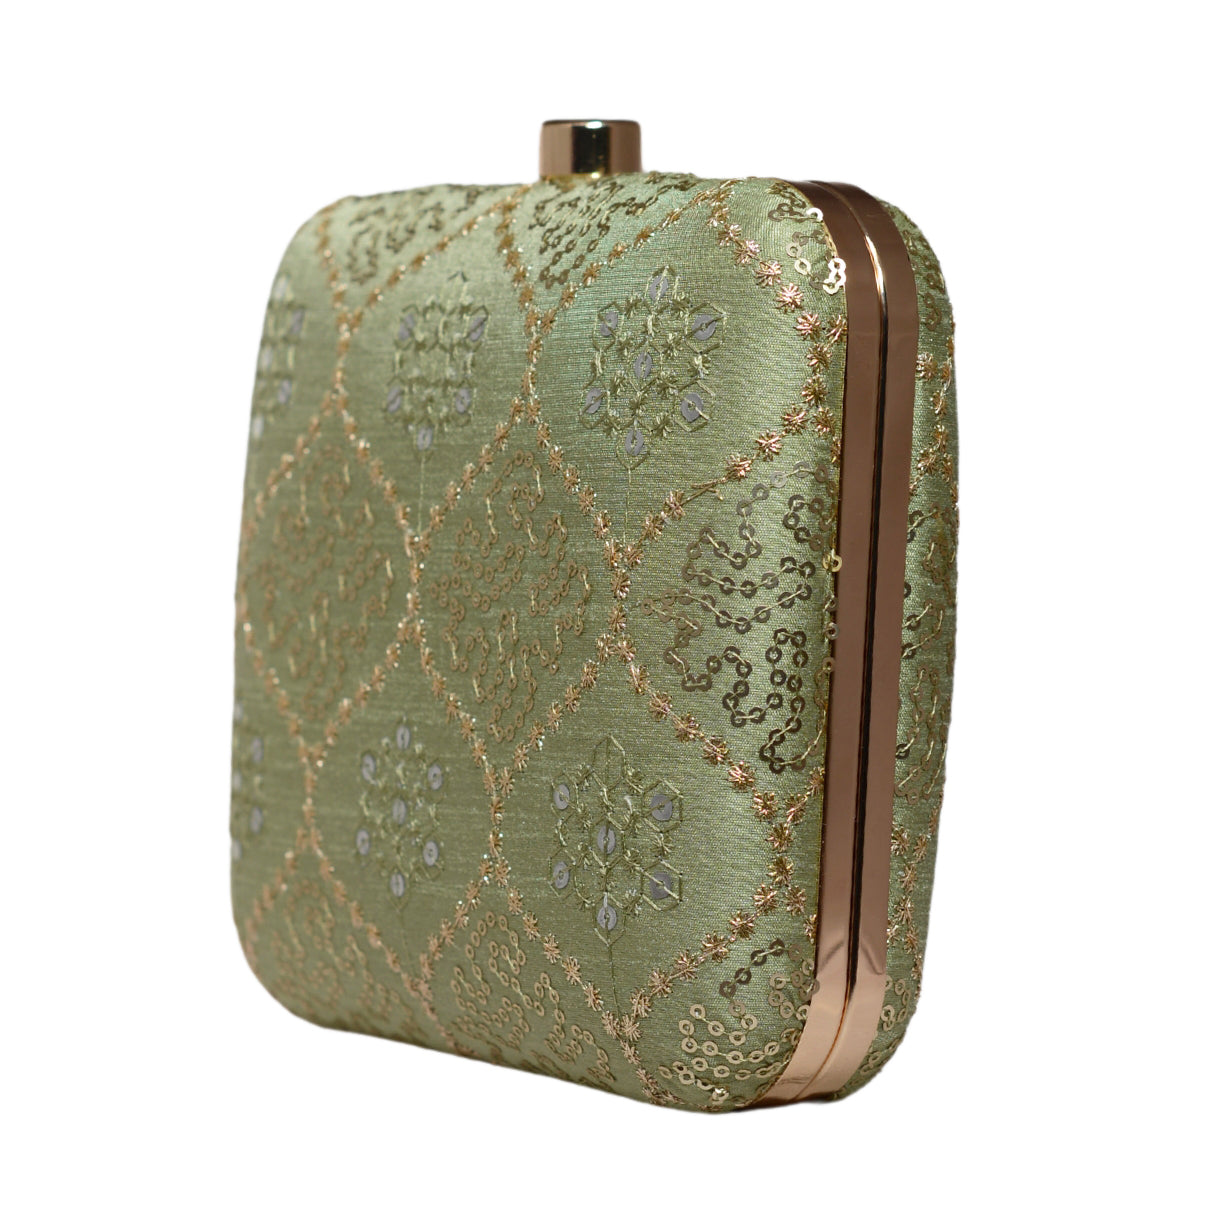 Pista Multipattern Sequins Embroidery Clutch